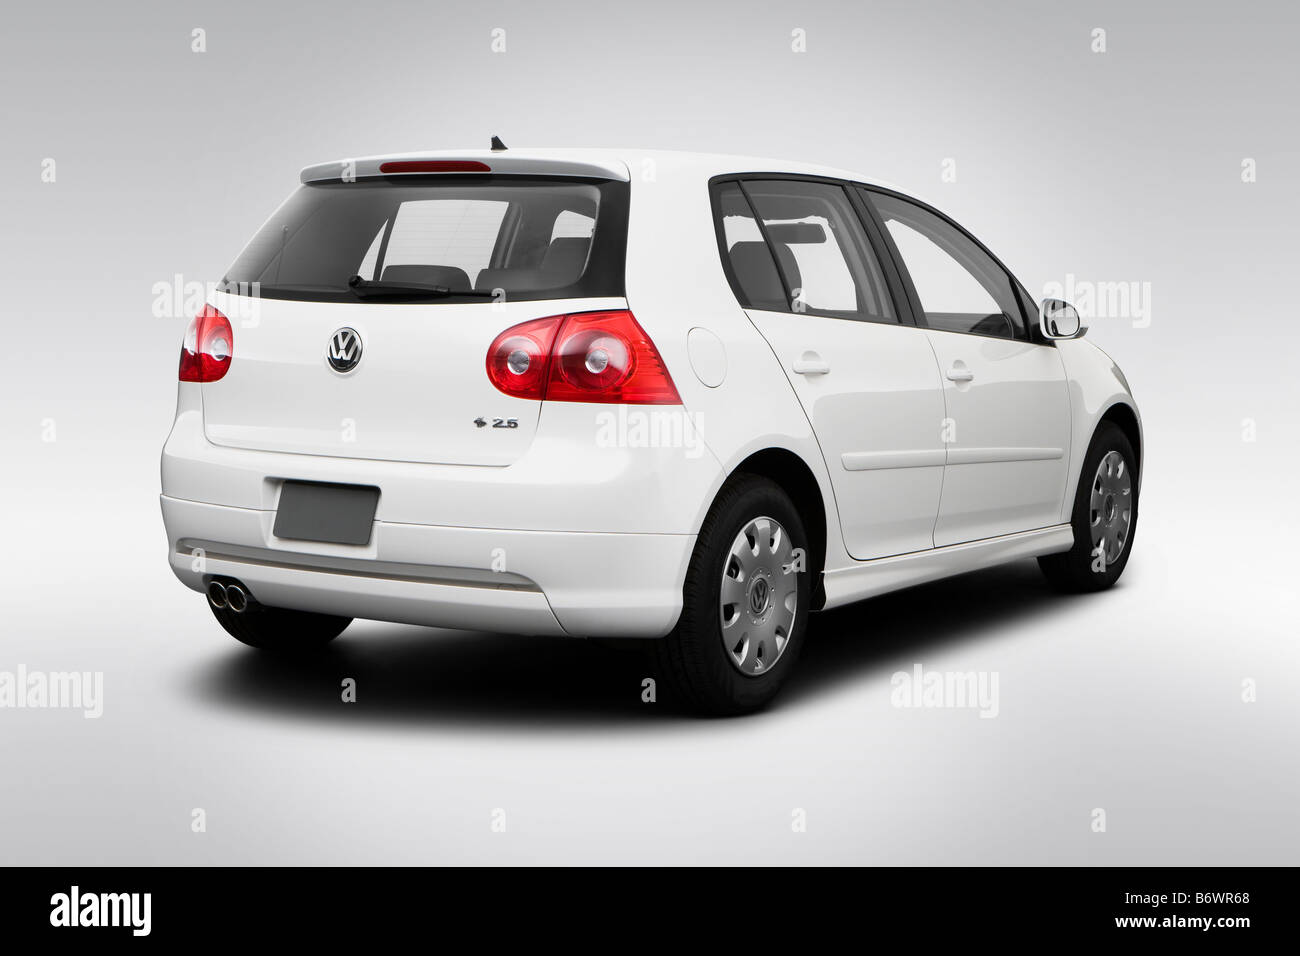 2009 Volkswagen Rabbit S in White - Rear angle view Stock Photo - Alamy